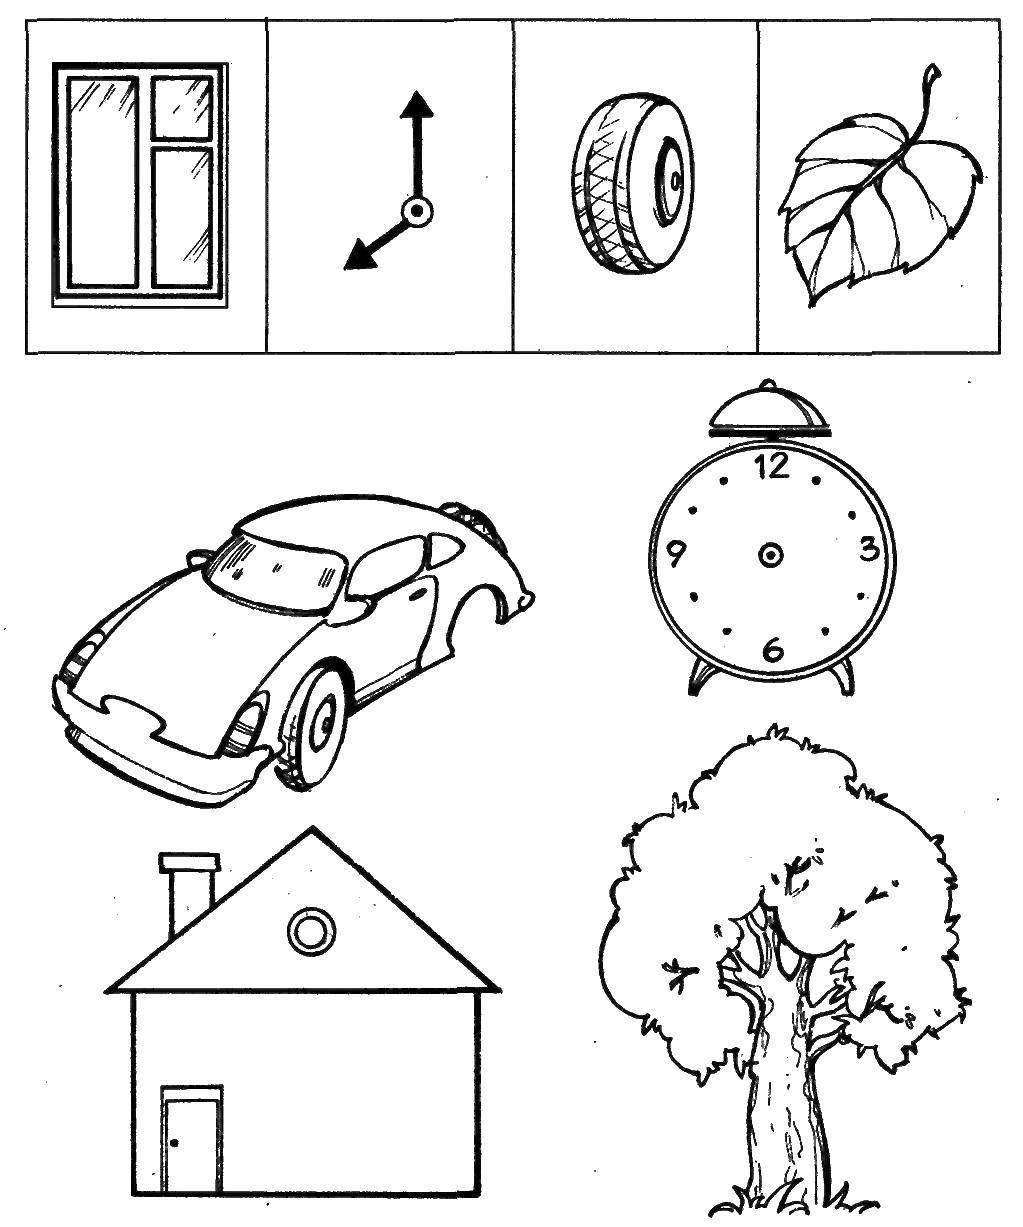 Coloring Where any items missing?. Category find items. Tags:  the items, found objects, image.